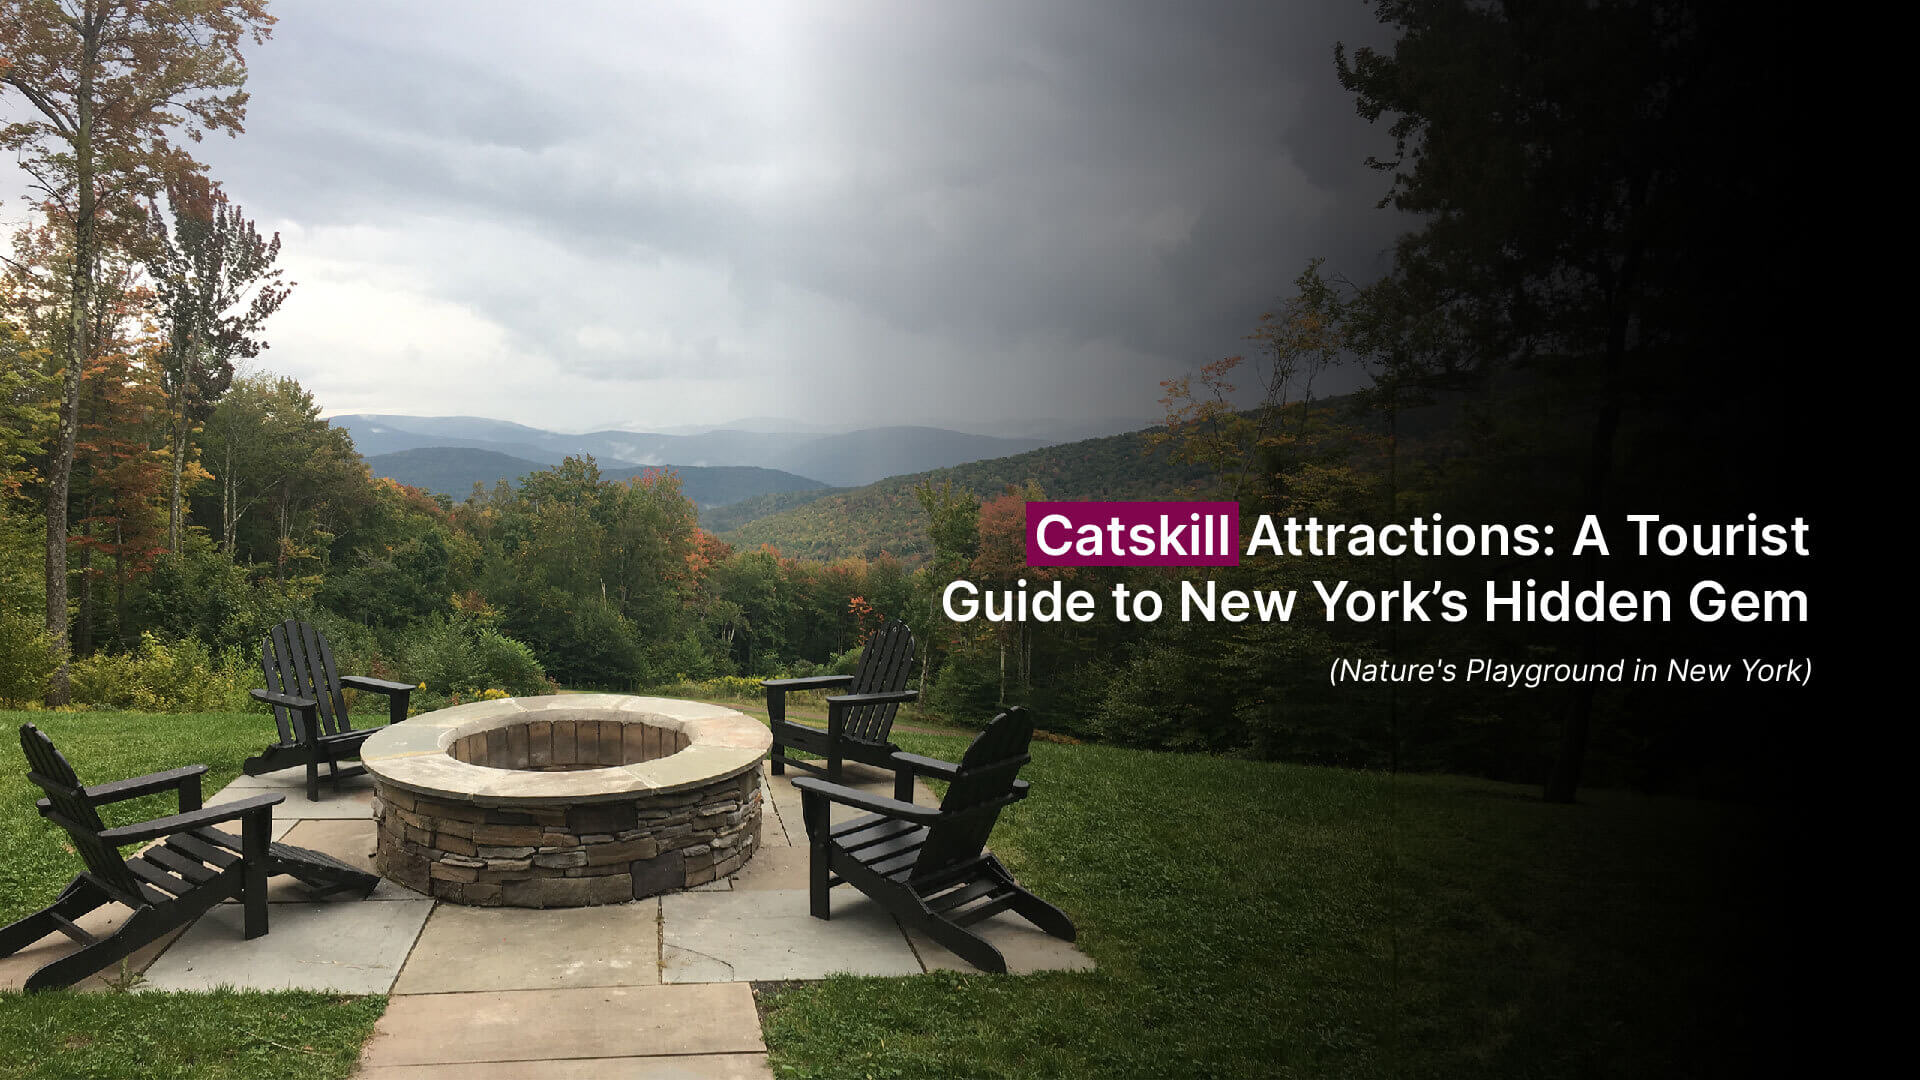 Catskill Attractions: A Tourist Guide to New York’s Hidden Gem